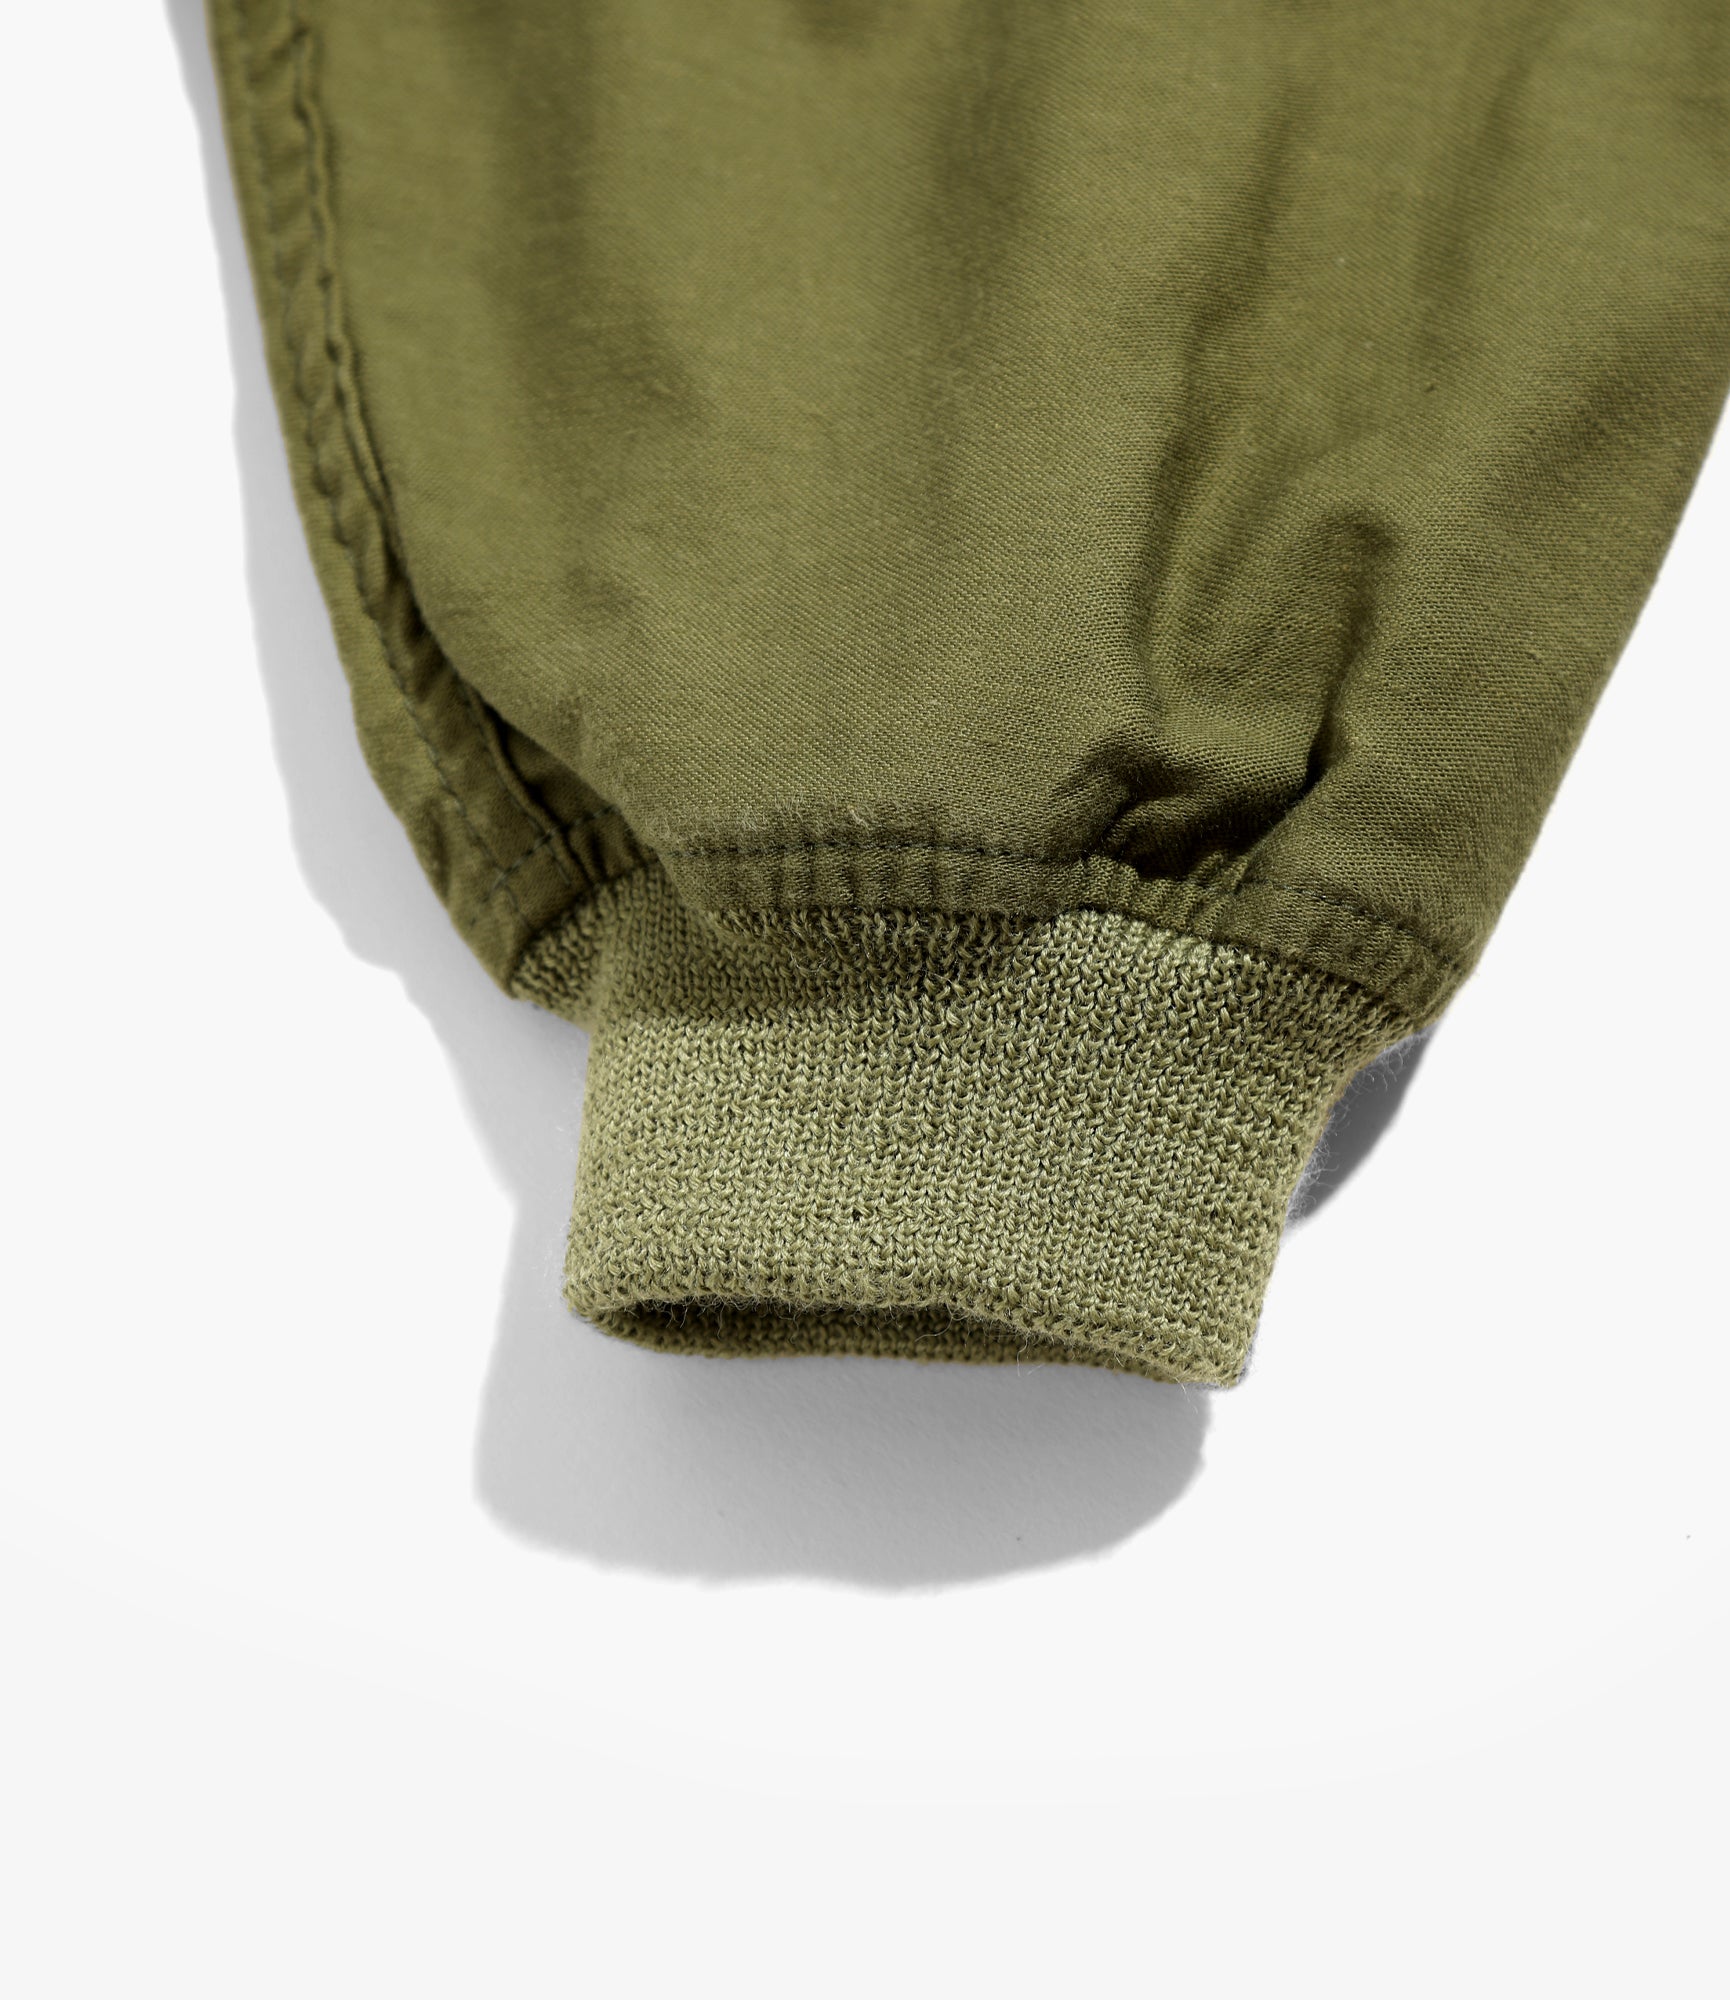 S.C. Army Shirt - Olive - Back Sateen